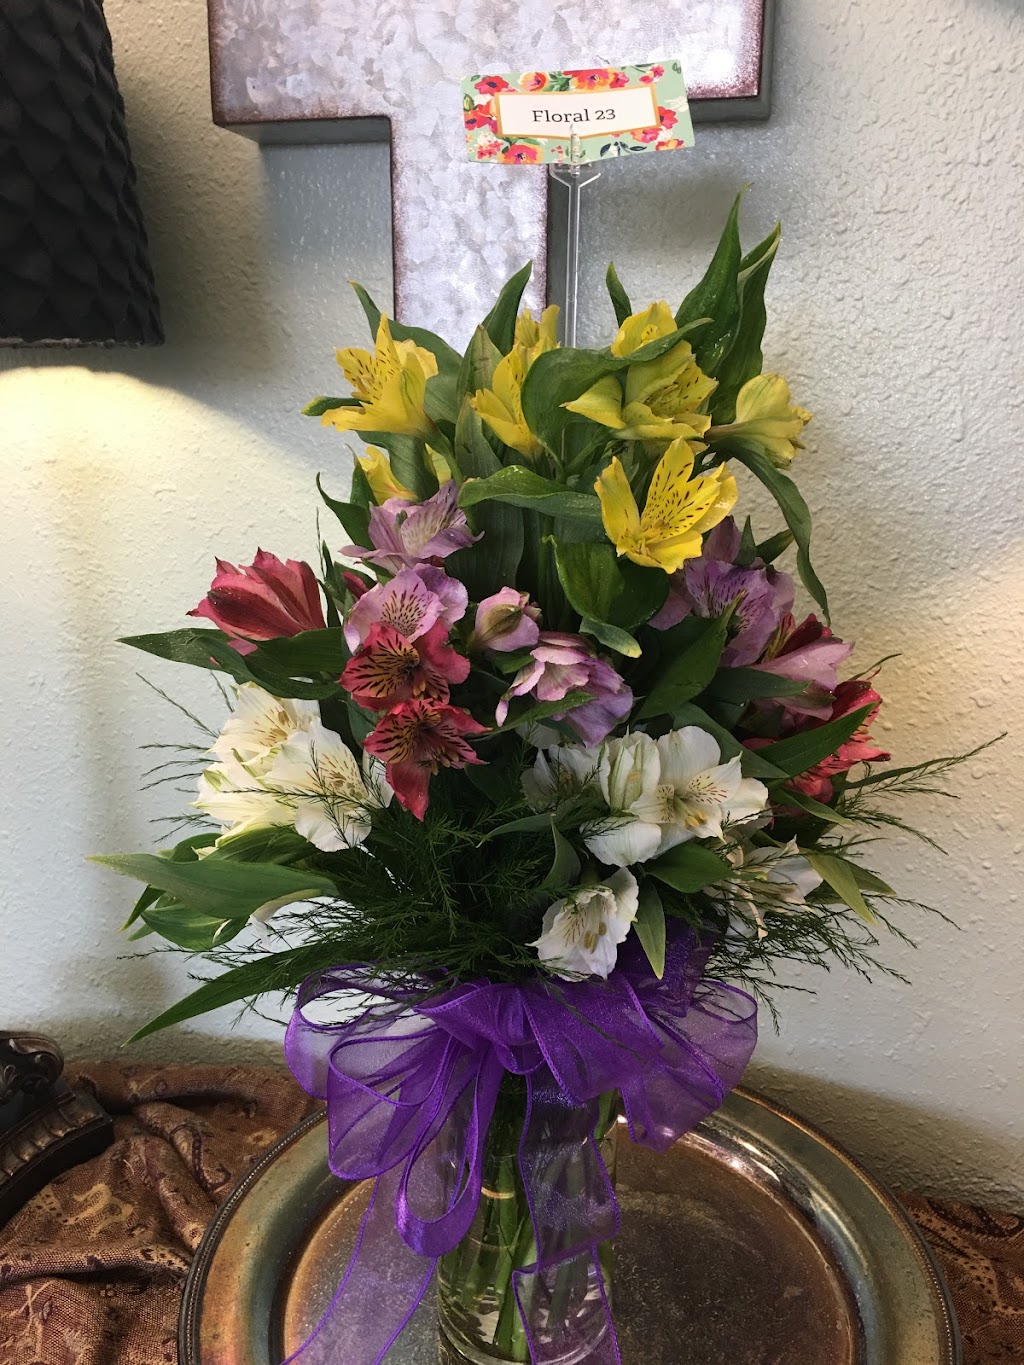 Floral 23 | 7407 NW 23rd St, Bethany, OK 73008, USA | Phone: (405) 603-5280